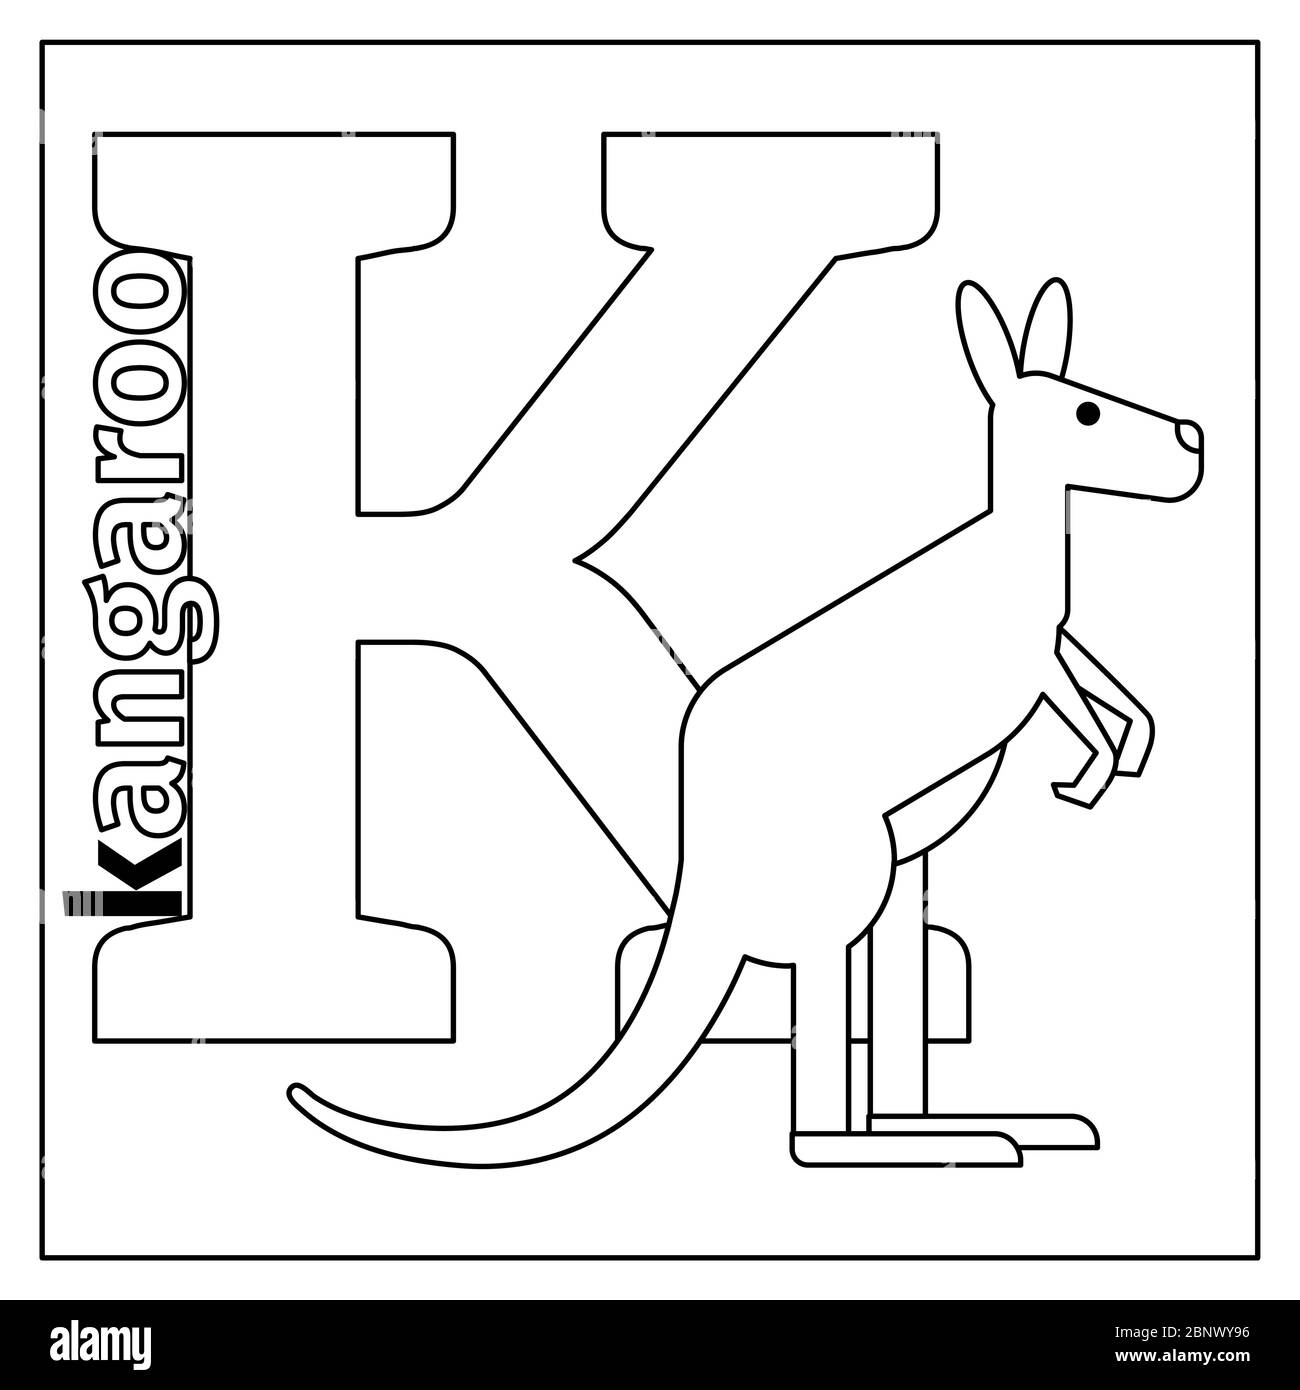 Coloring page or card for kids with English animals zoo alphabet. Kangaroo, letter K vector illustration Stock Vector